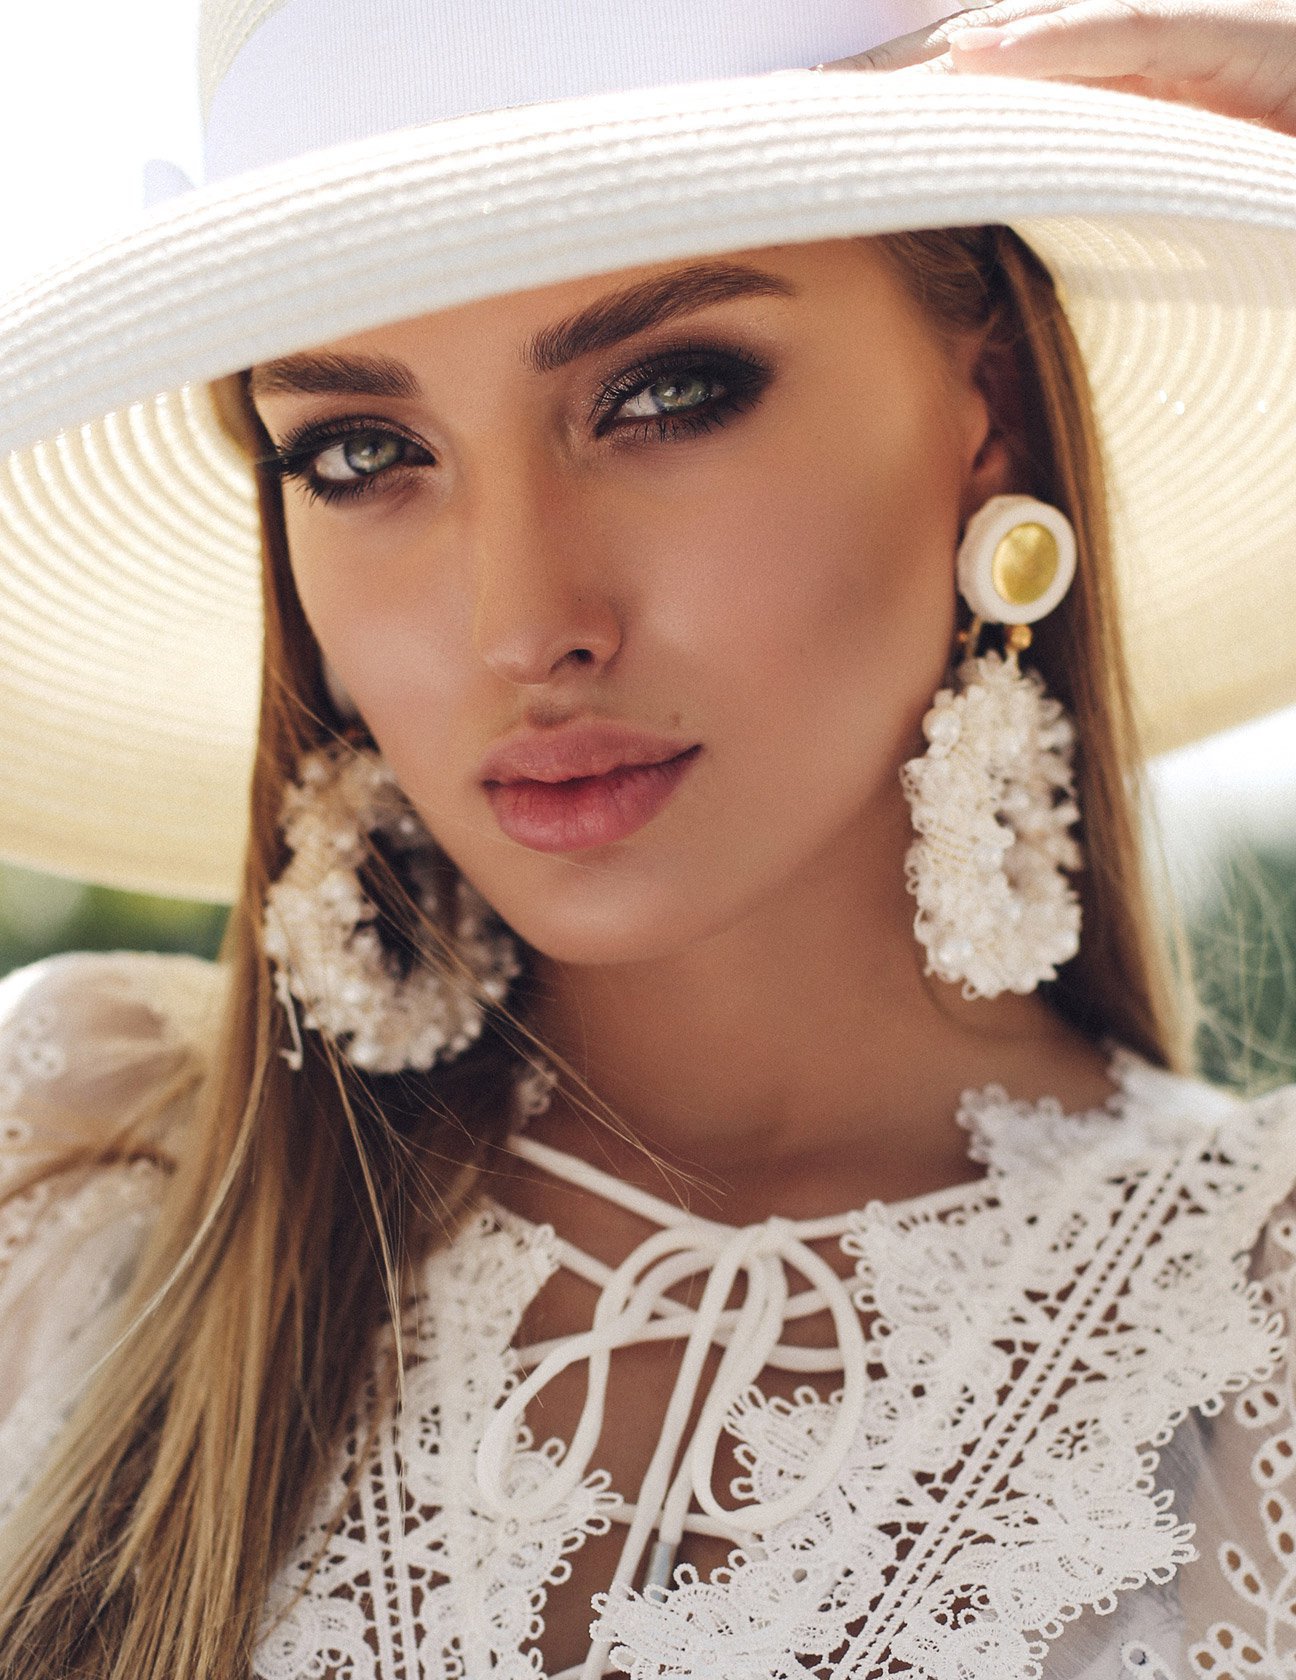 pretty prp injection patient model wearing a lacey top and wide sun hat